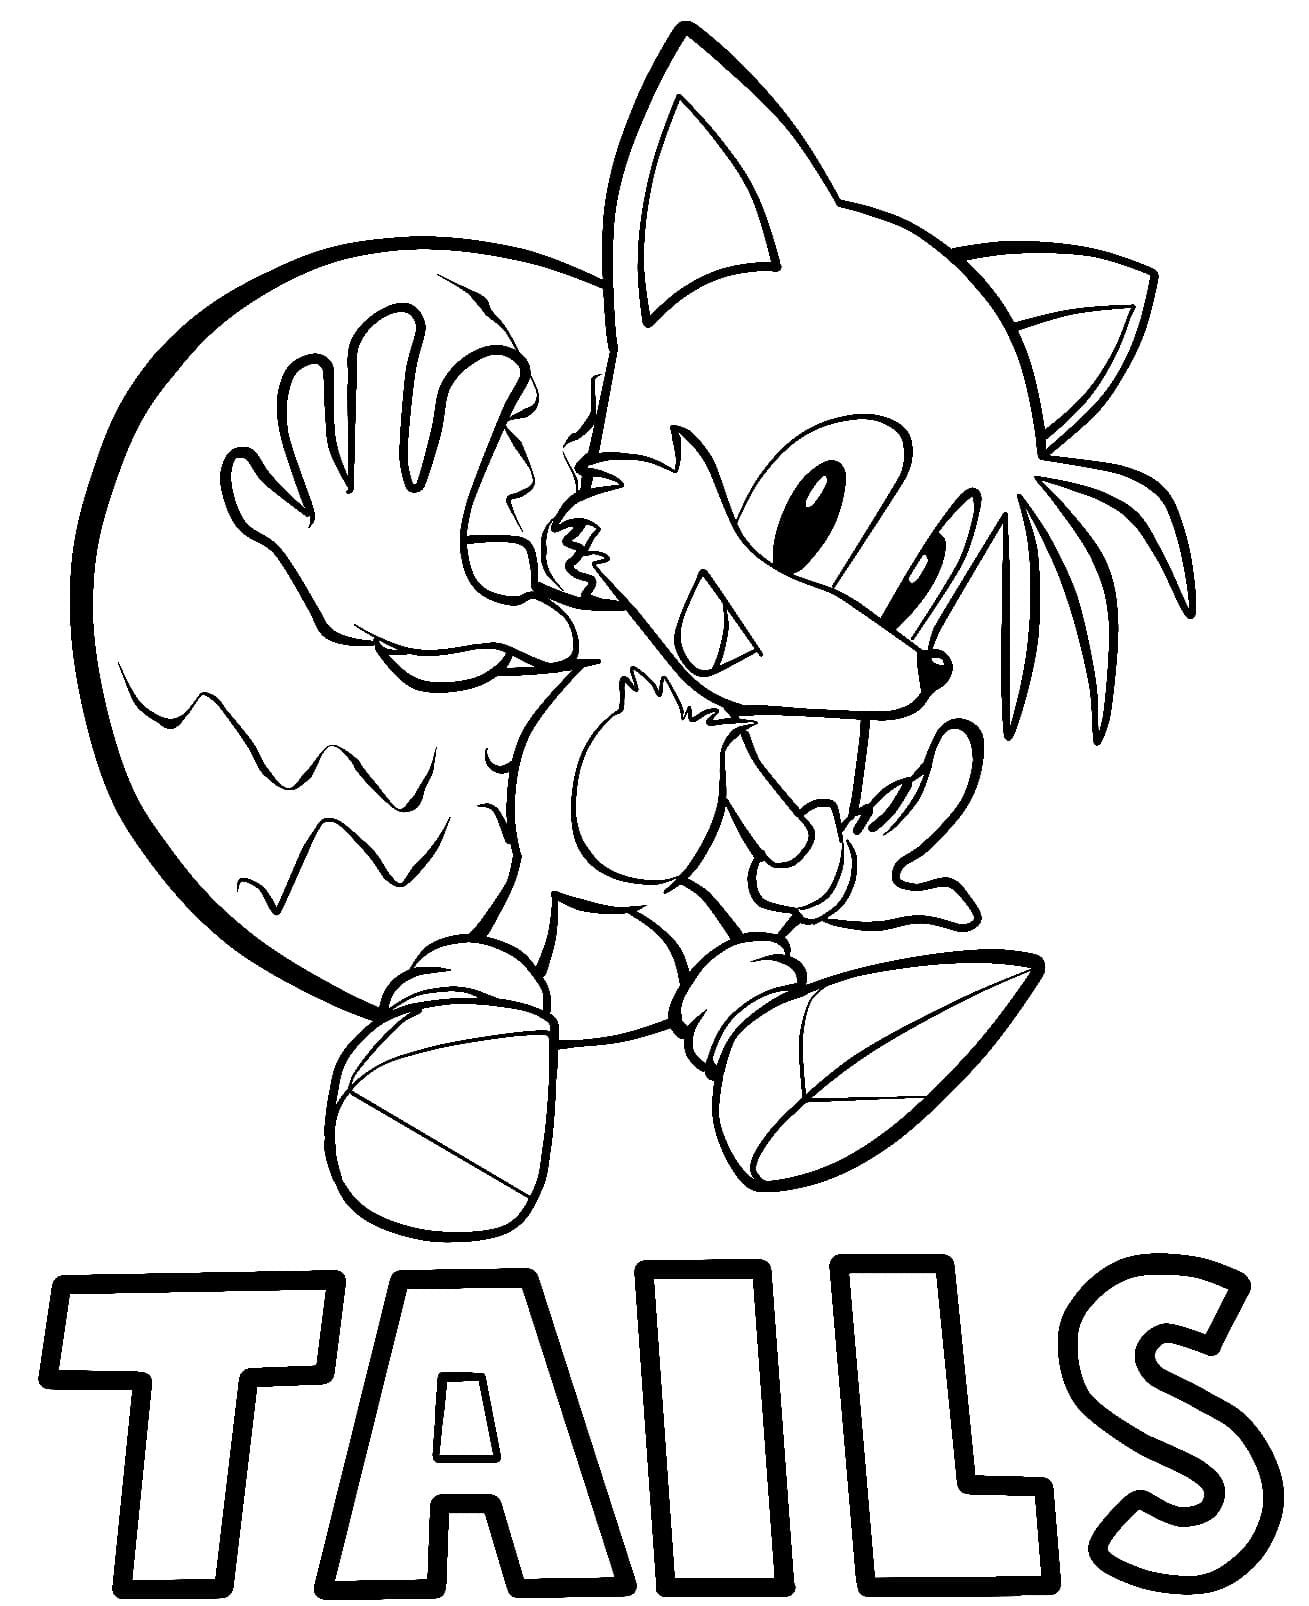 Tails free coloring page